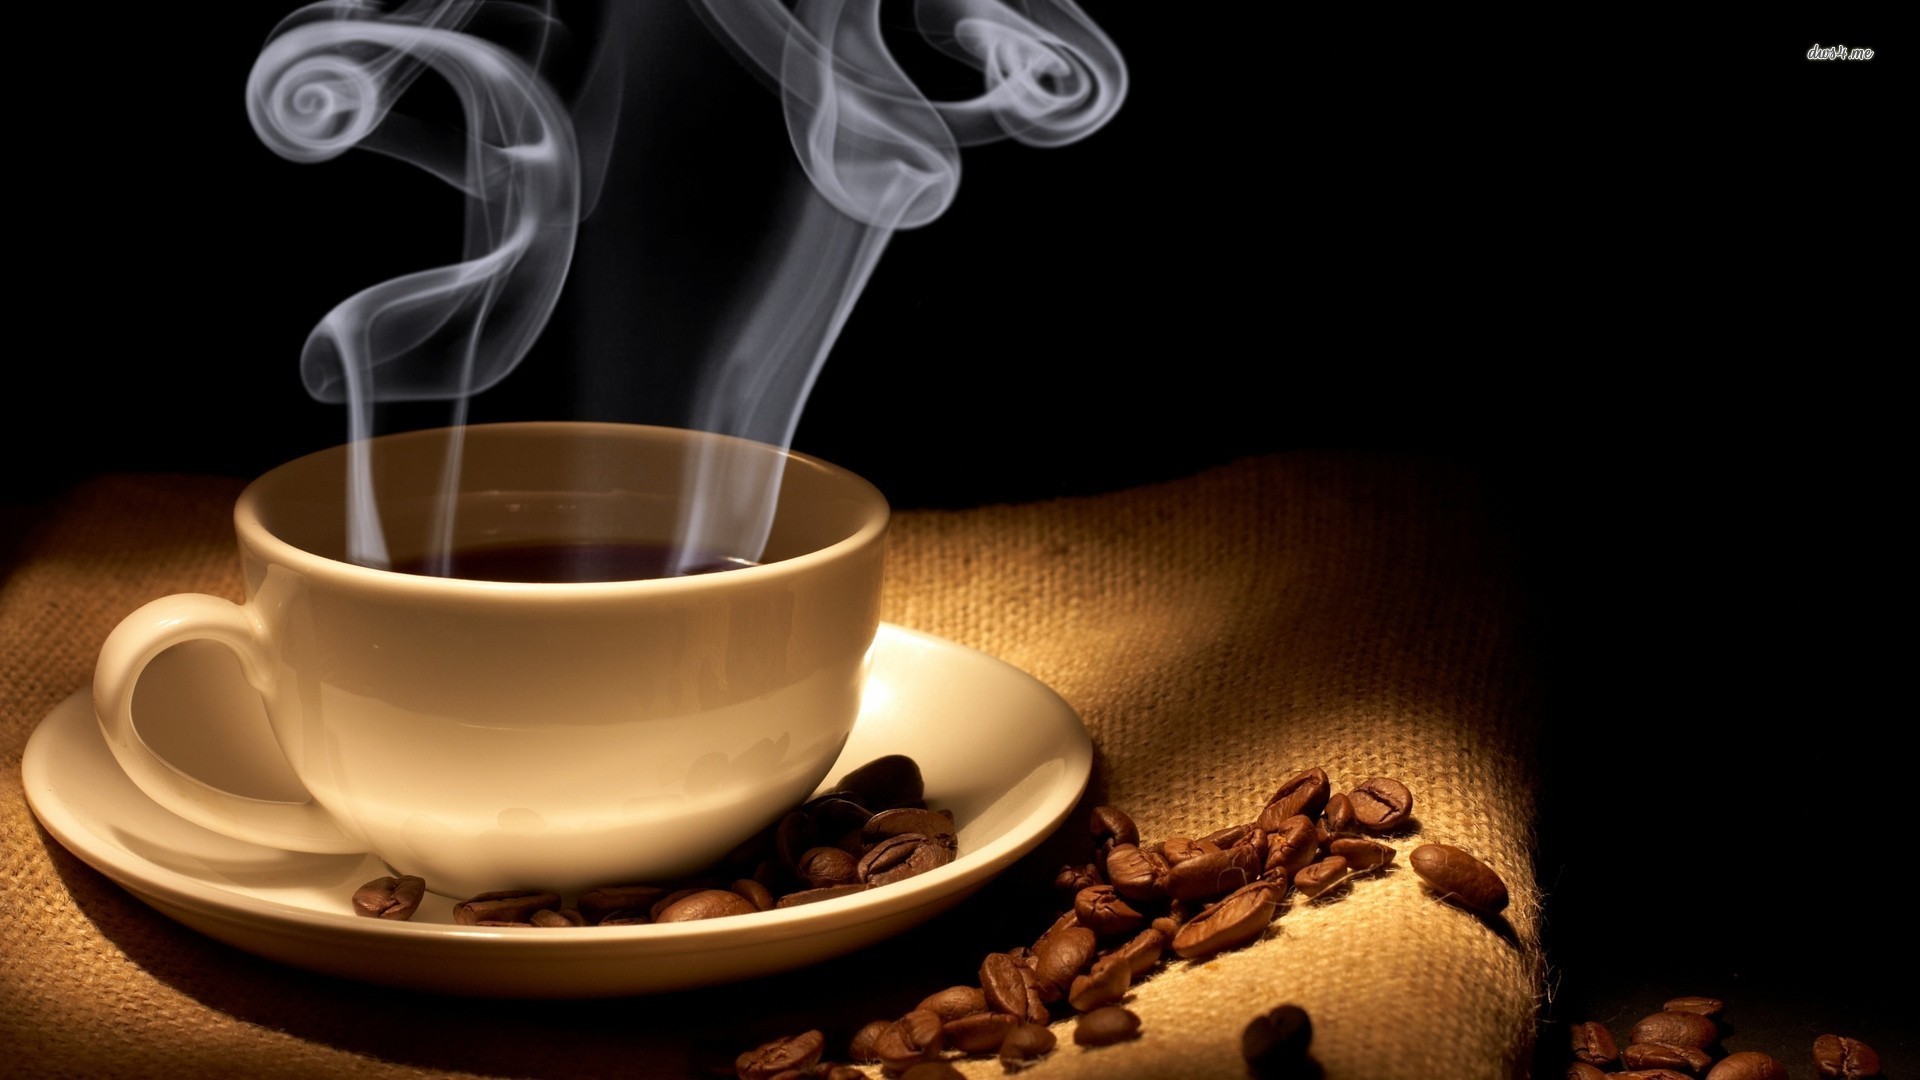 1920x1080 18424-steaming-cup-of-coffee-1920Ã1080-photography-wallpaper